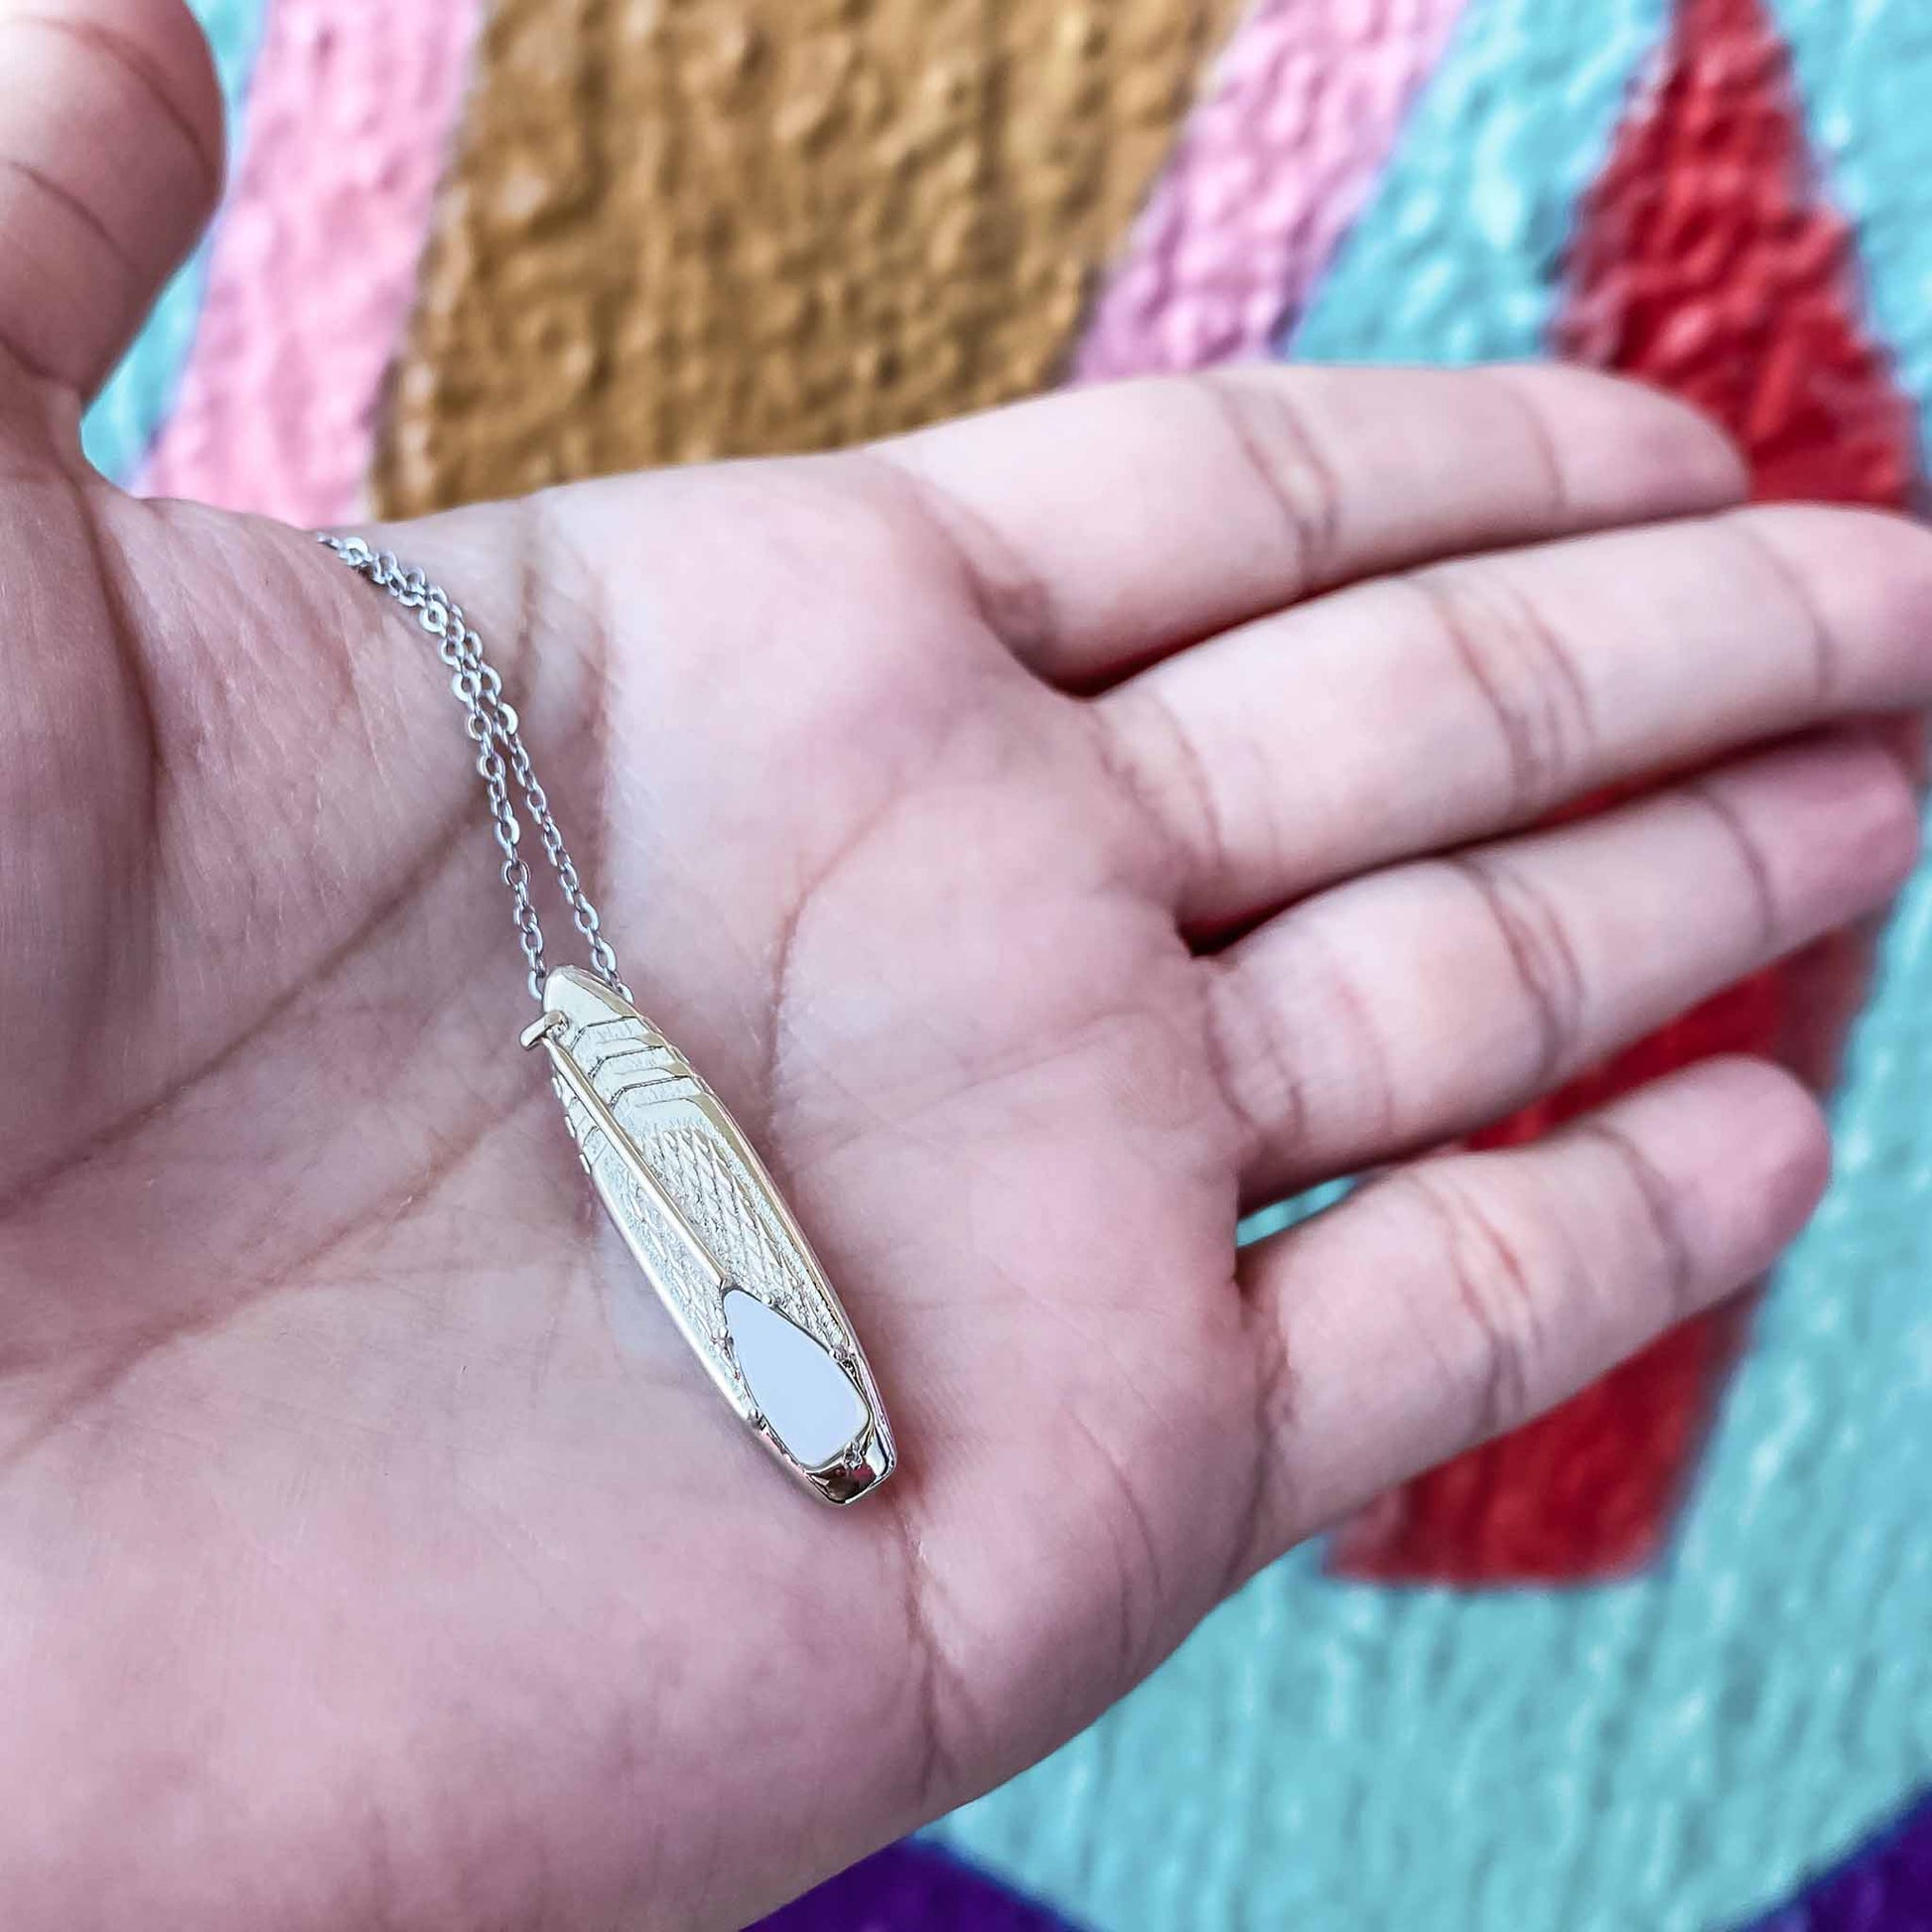 Looking for places to buy or rent a paddle board? This stand up paddle board pendant will be the best and highest performance SUP you'll ever find. Take your paddle board with you, even when you're not surfing, racing or touring. Shop June's birthstone SUP jewelry online or at a surf shop near you.